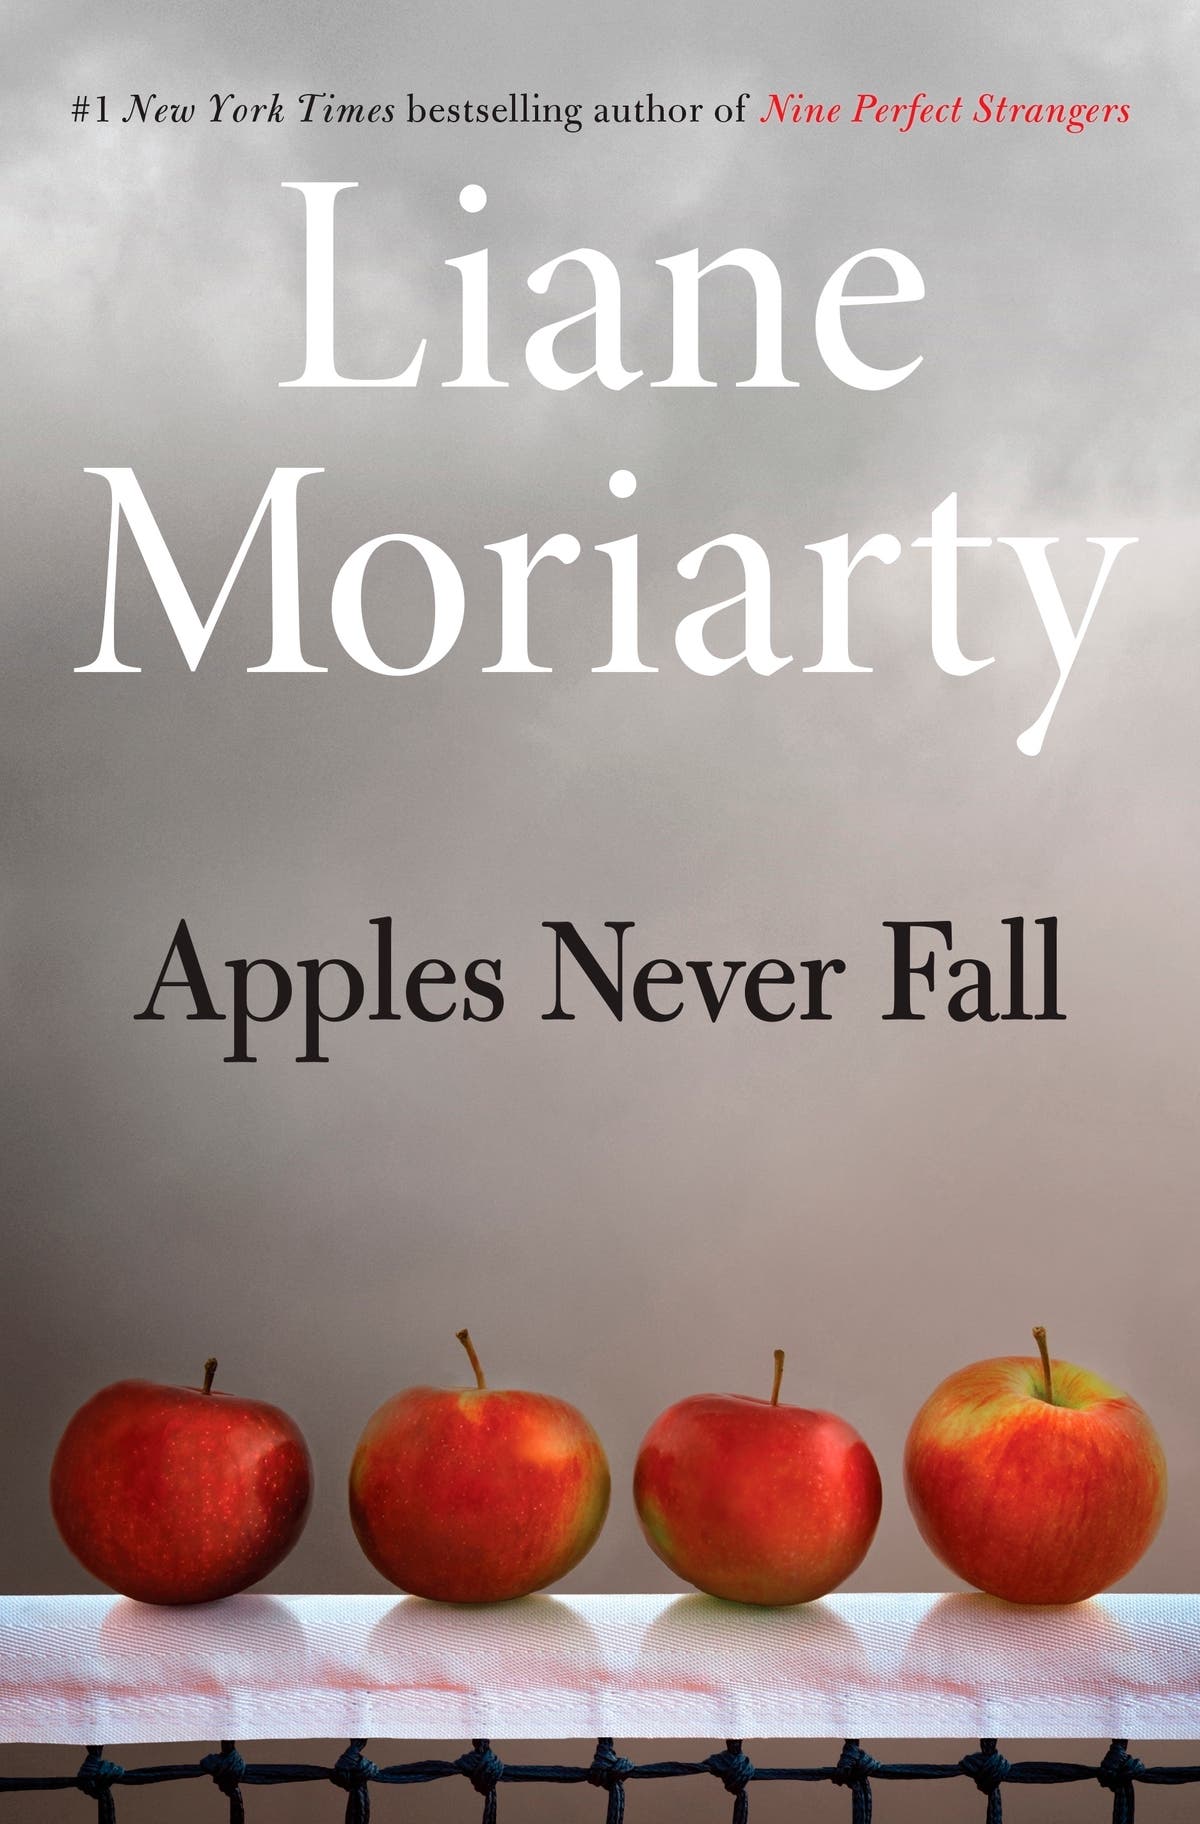 Review: Liane Moriarty hits an ace with 'Apples Never Fall'